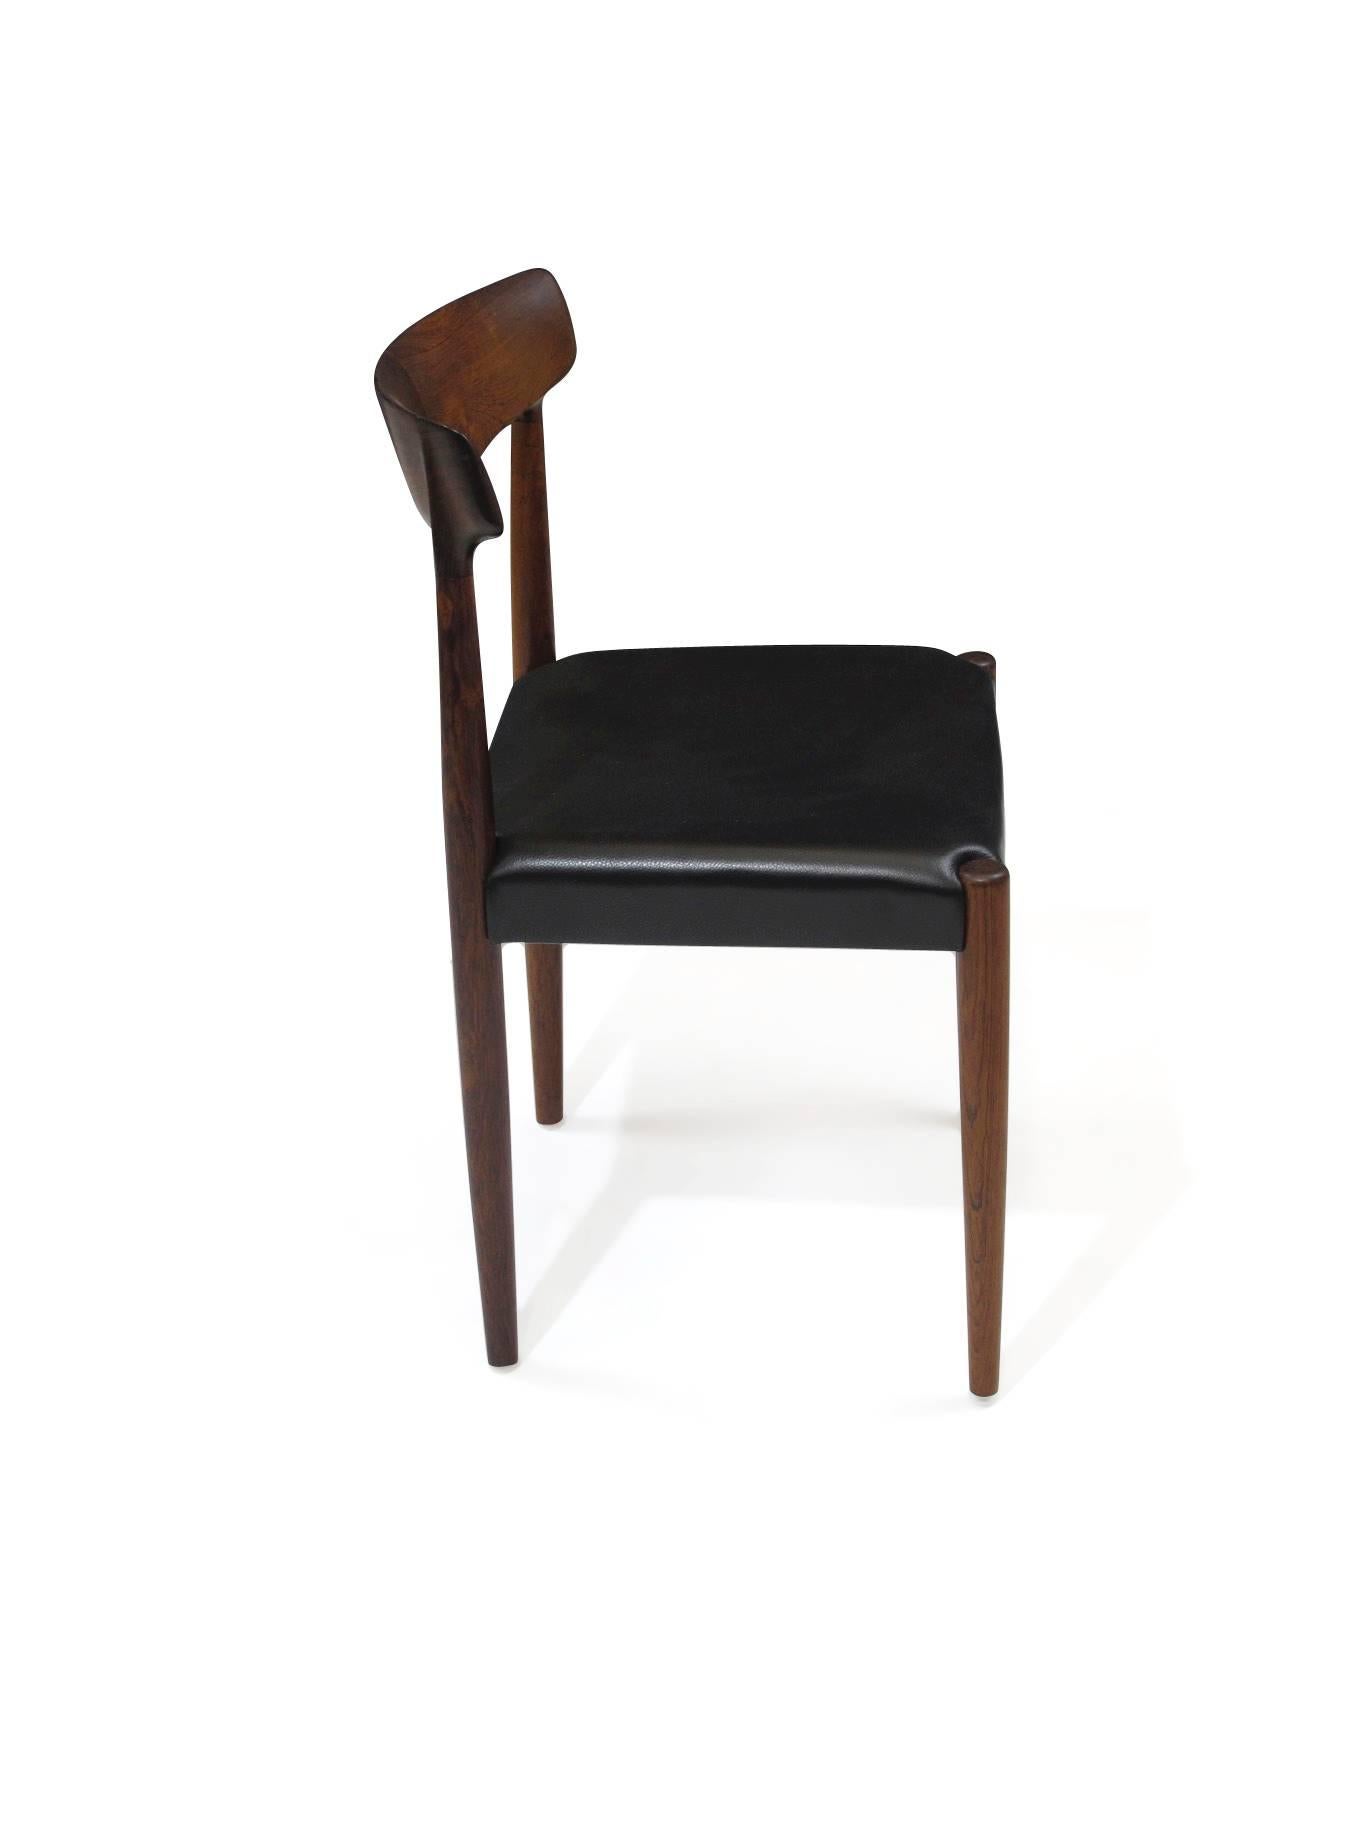 Knud Faerch Danish Rosewood Dining Chairs In Excellent Condition For Sale In Oakland, CA